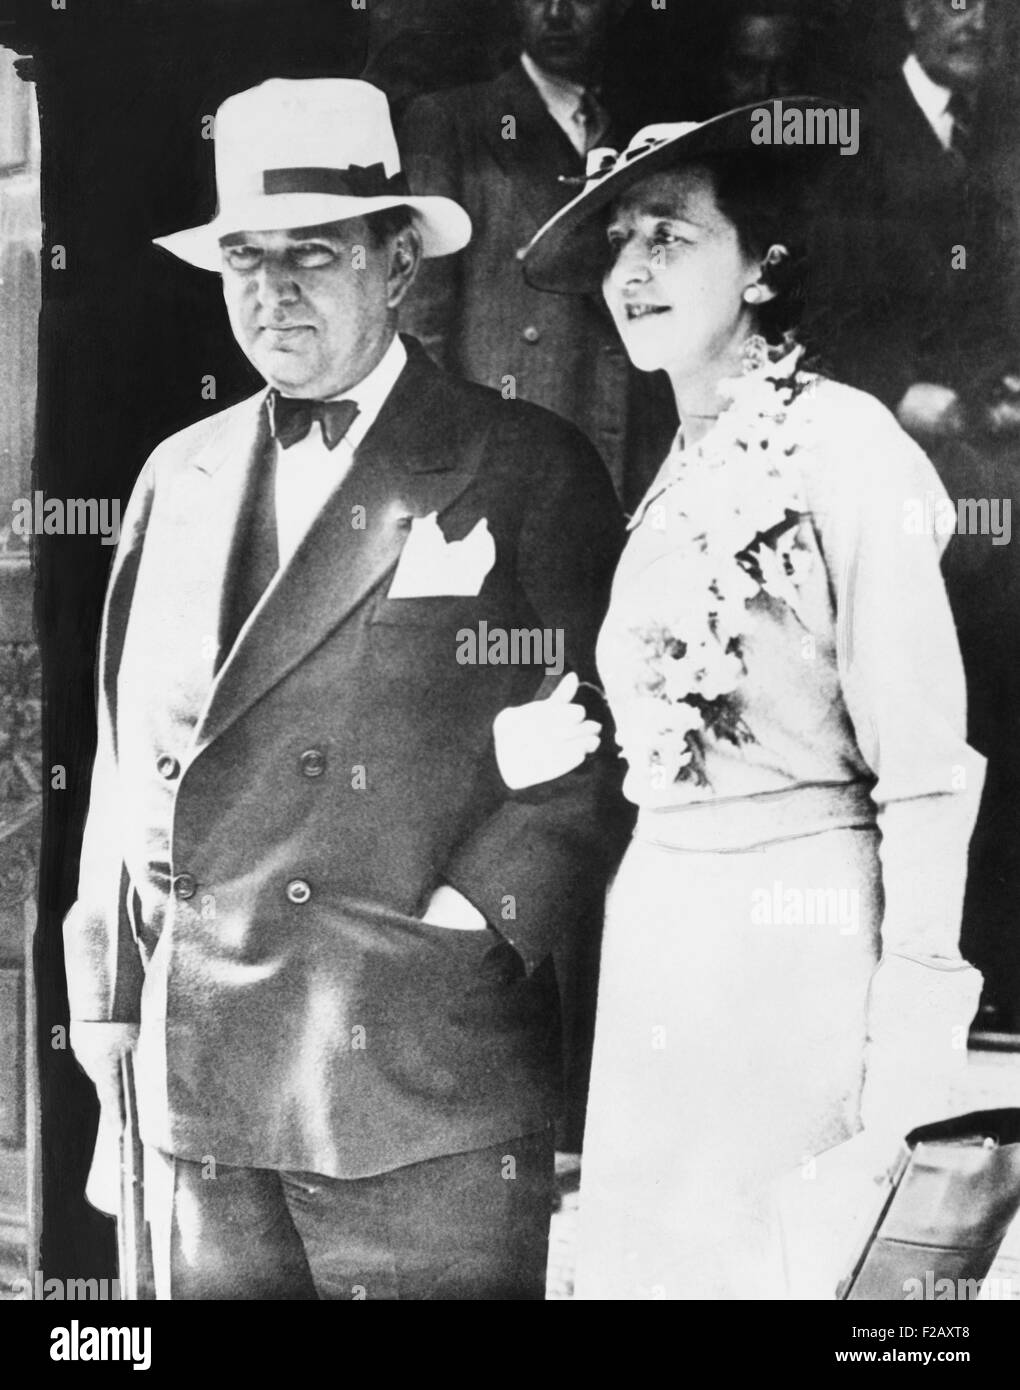 George Washington Hill, Chairman of American Tobacco Company. His advertisements successfully campaigns targeted women. He is with his new bride, Miss Mary Barnes, his former secretary, as they leave the London marriage bureau, July 14, 1935. (CSU 2015 9 974) Stock Photo